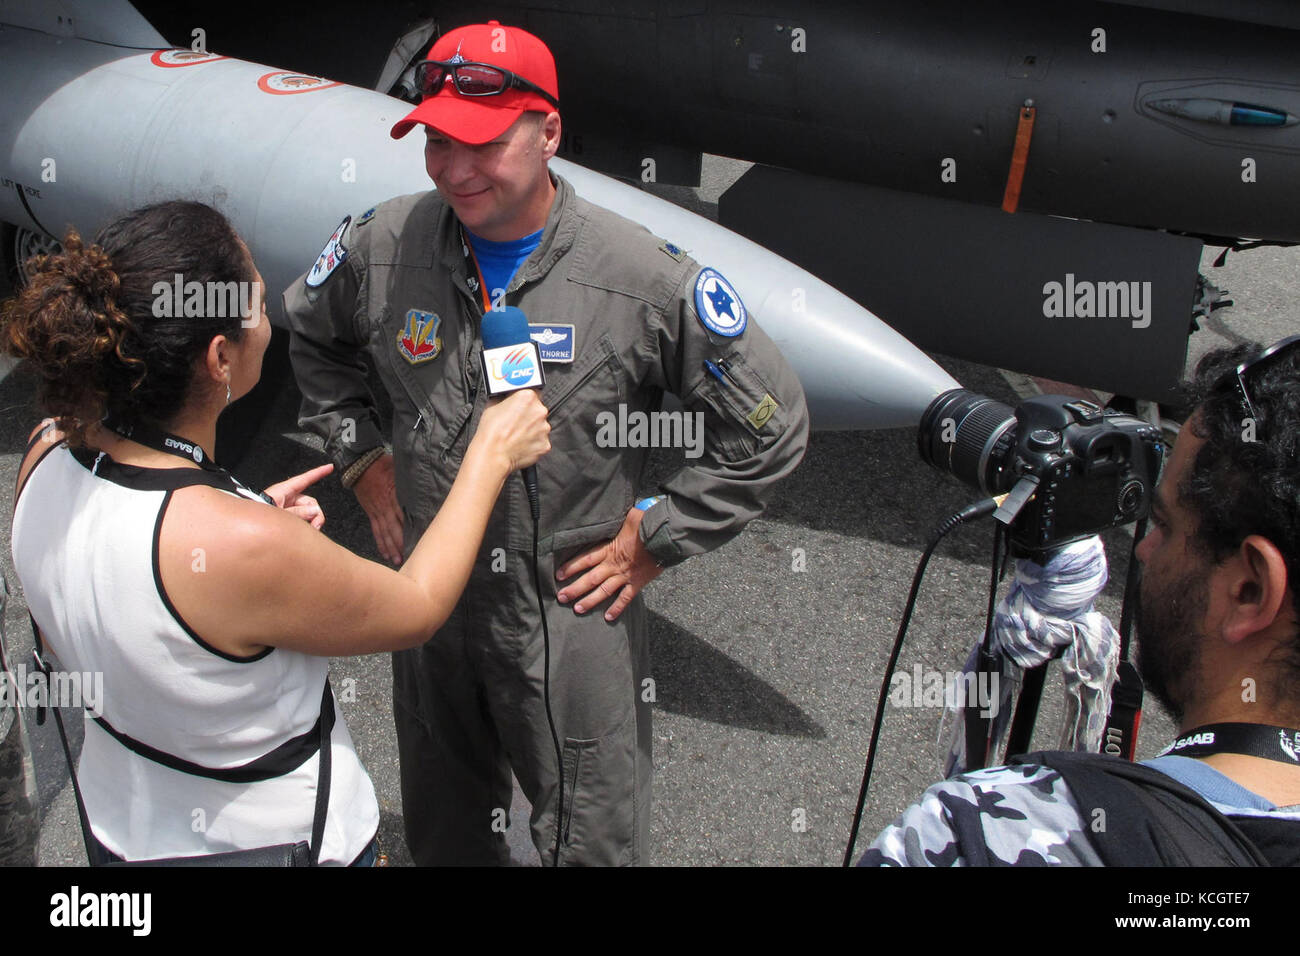 A reporter from a Colombian television station interviews U.S. Air Force Lt. Col. Andrew Thorne while Tech. Sgt. Jorge Intriago translates into Spanish in front of a South Carolina Air National Guard F-16 during the Colombian Air Force’s Feria Aeronautica Internaccional – Colombia in Rionegro, July 14, 2017. The United States Air Force is participating in the four-day air show with two South Carolina Air National Guard F-16s as static displays, plus static displays of a KC-135, KC-10, along with an aerial demonstration by the Air Combat Command’s Viper East Demo Team and a B-52 flyover. The Un Stock Photo